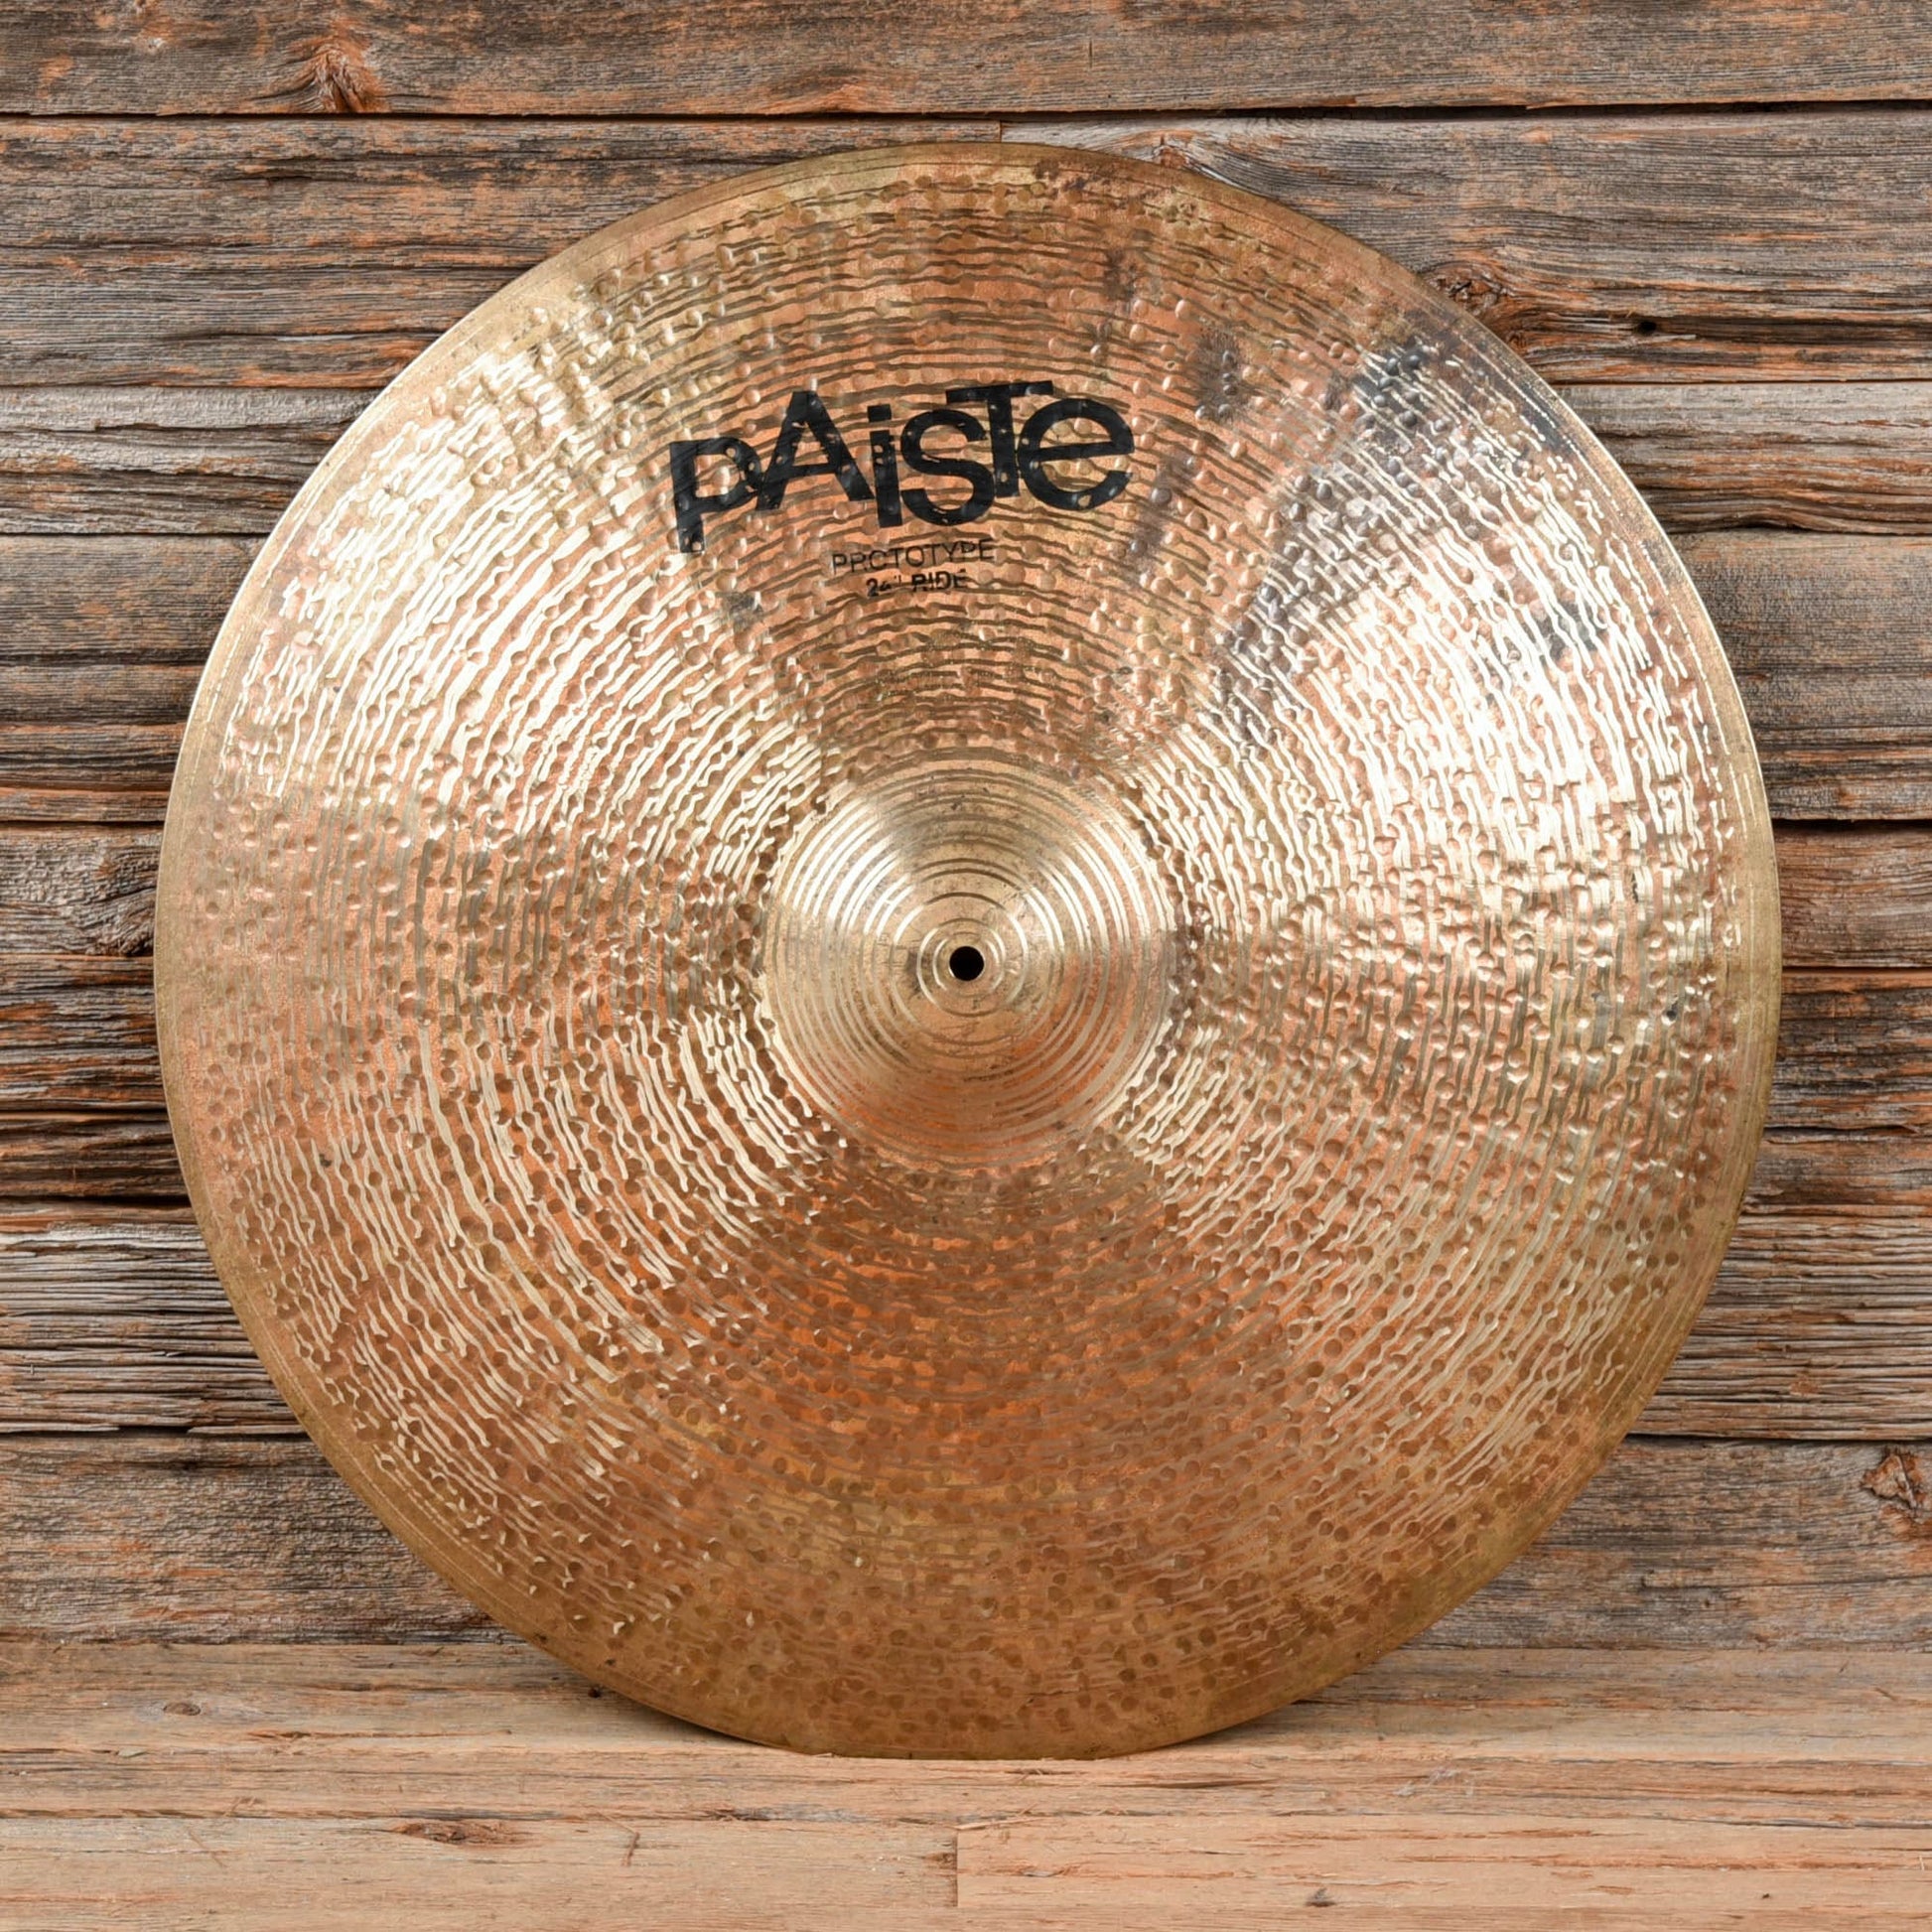 Paiste 24" Prototype Ride Cymbal USED Drums and Percussion